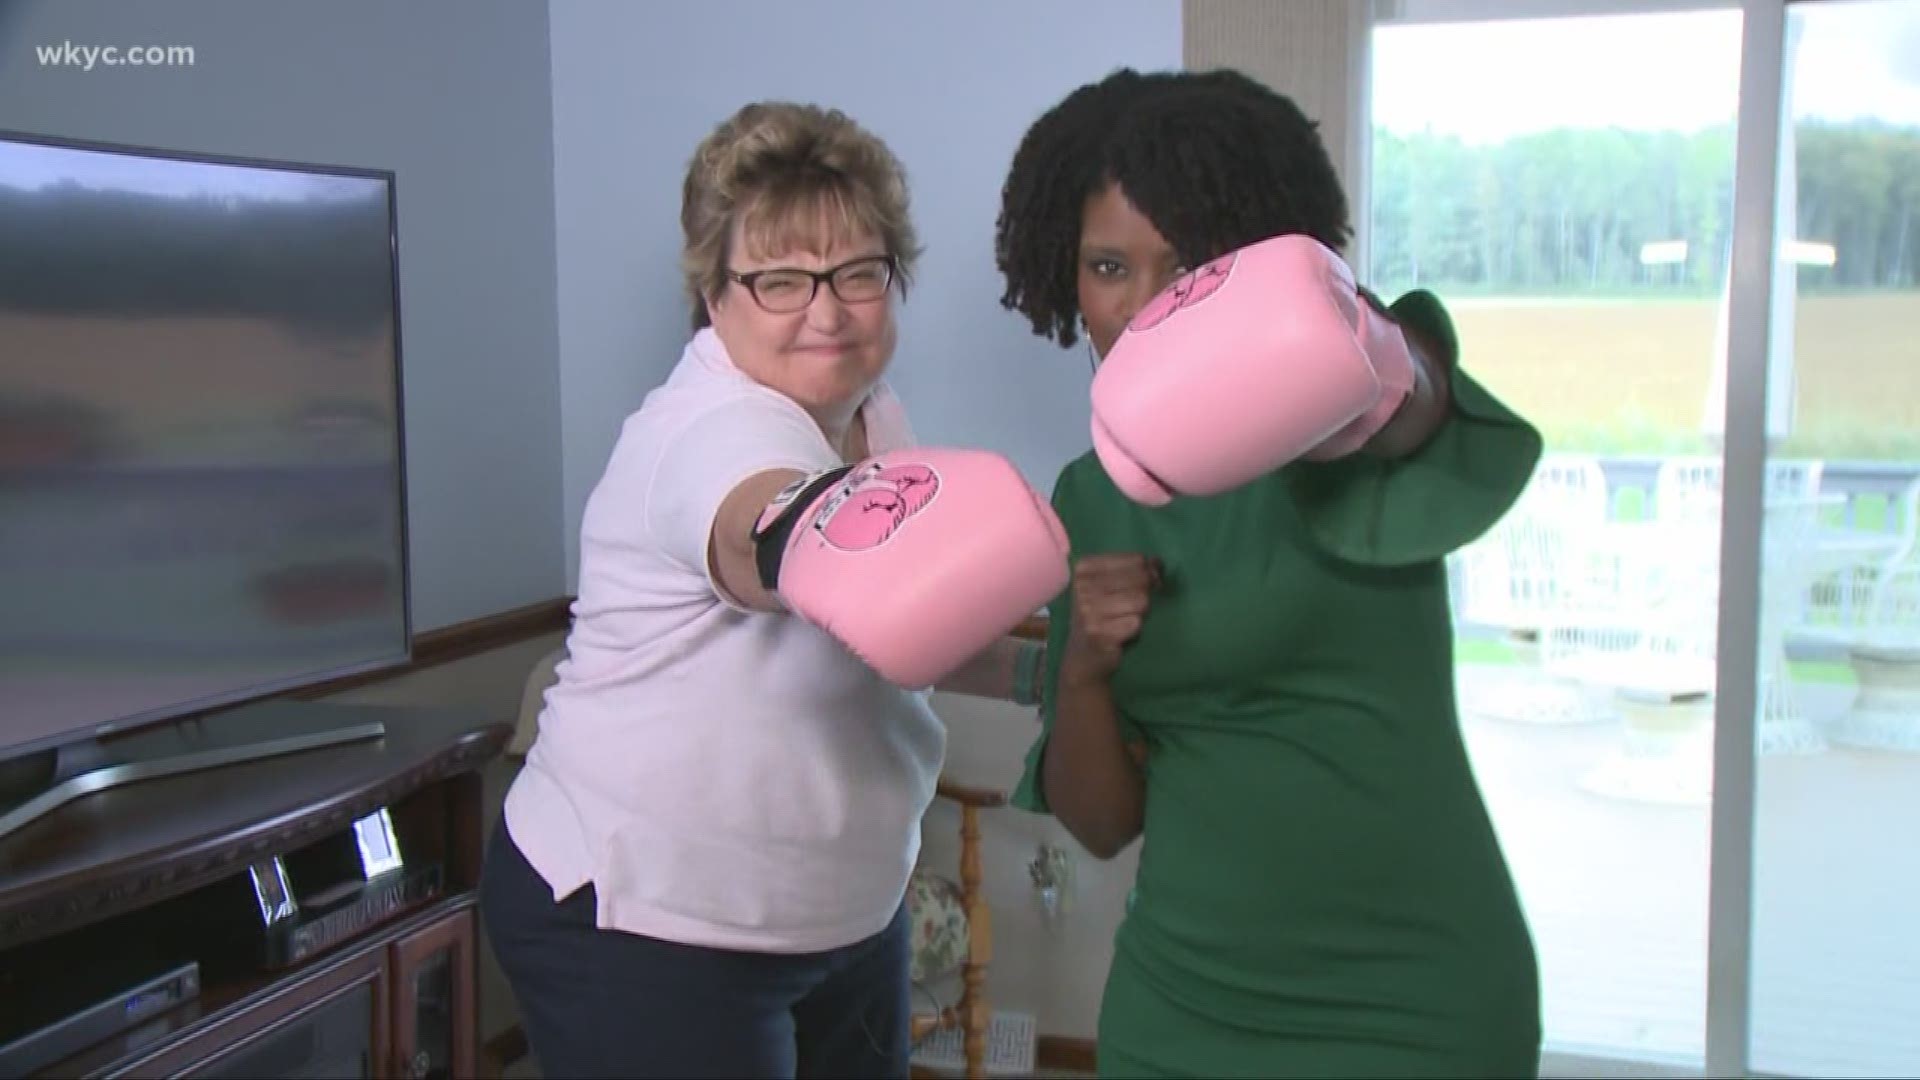 Oct. 30, 2018: Meet Marcy Calvert. She beat breast cancer, and now runs a non-profit organization to help others fighting the disease.